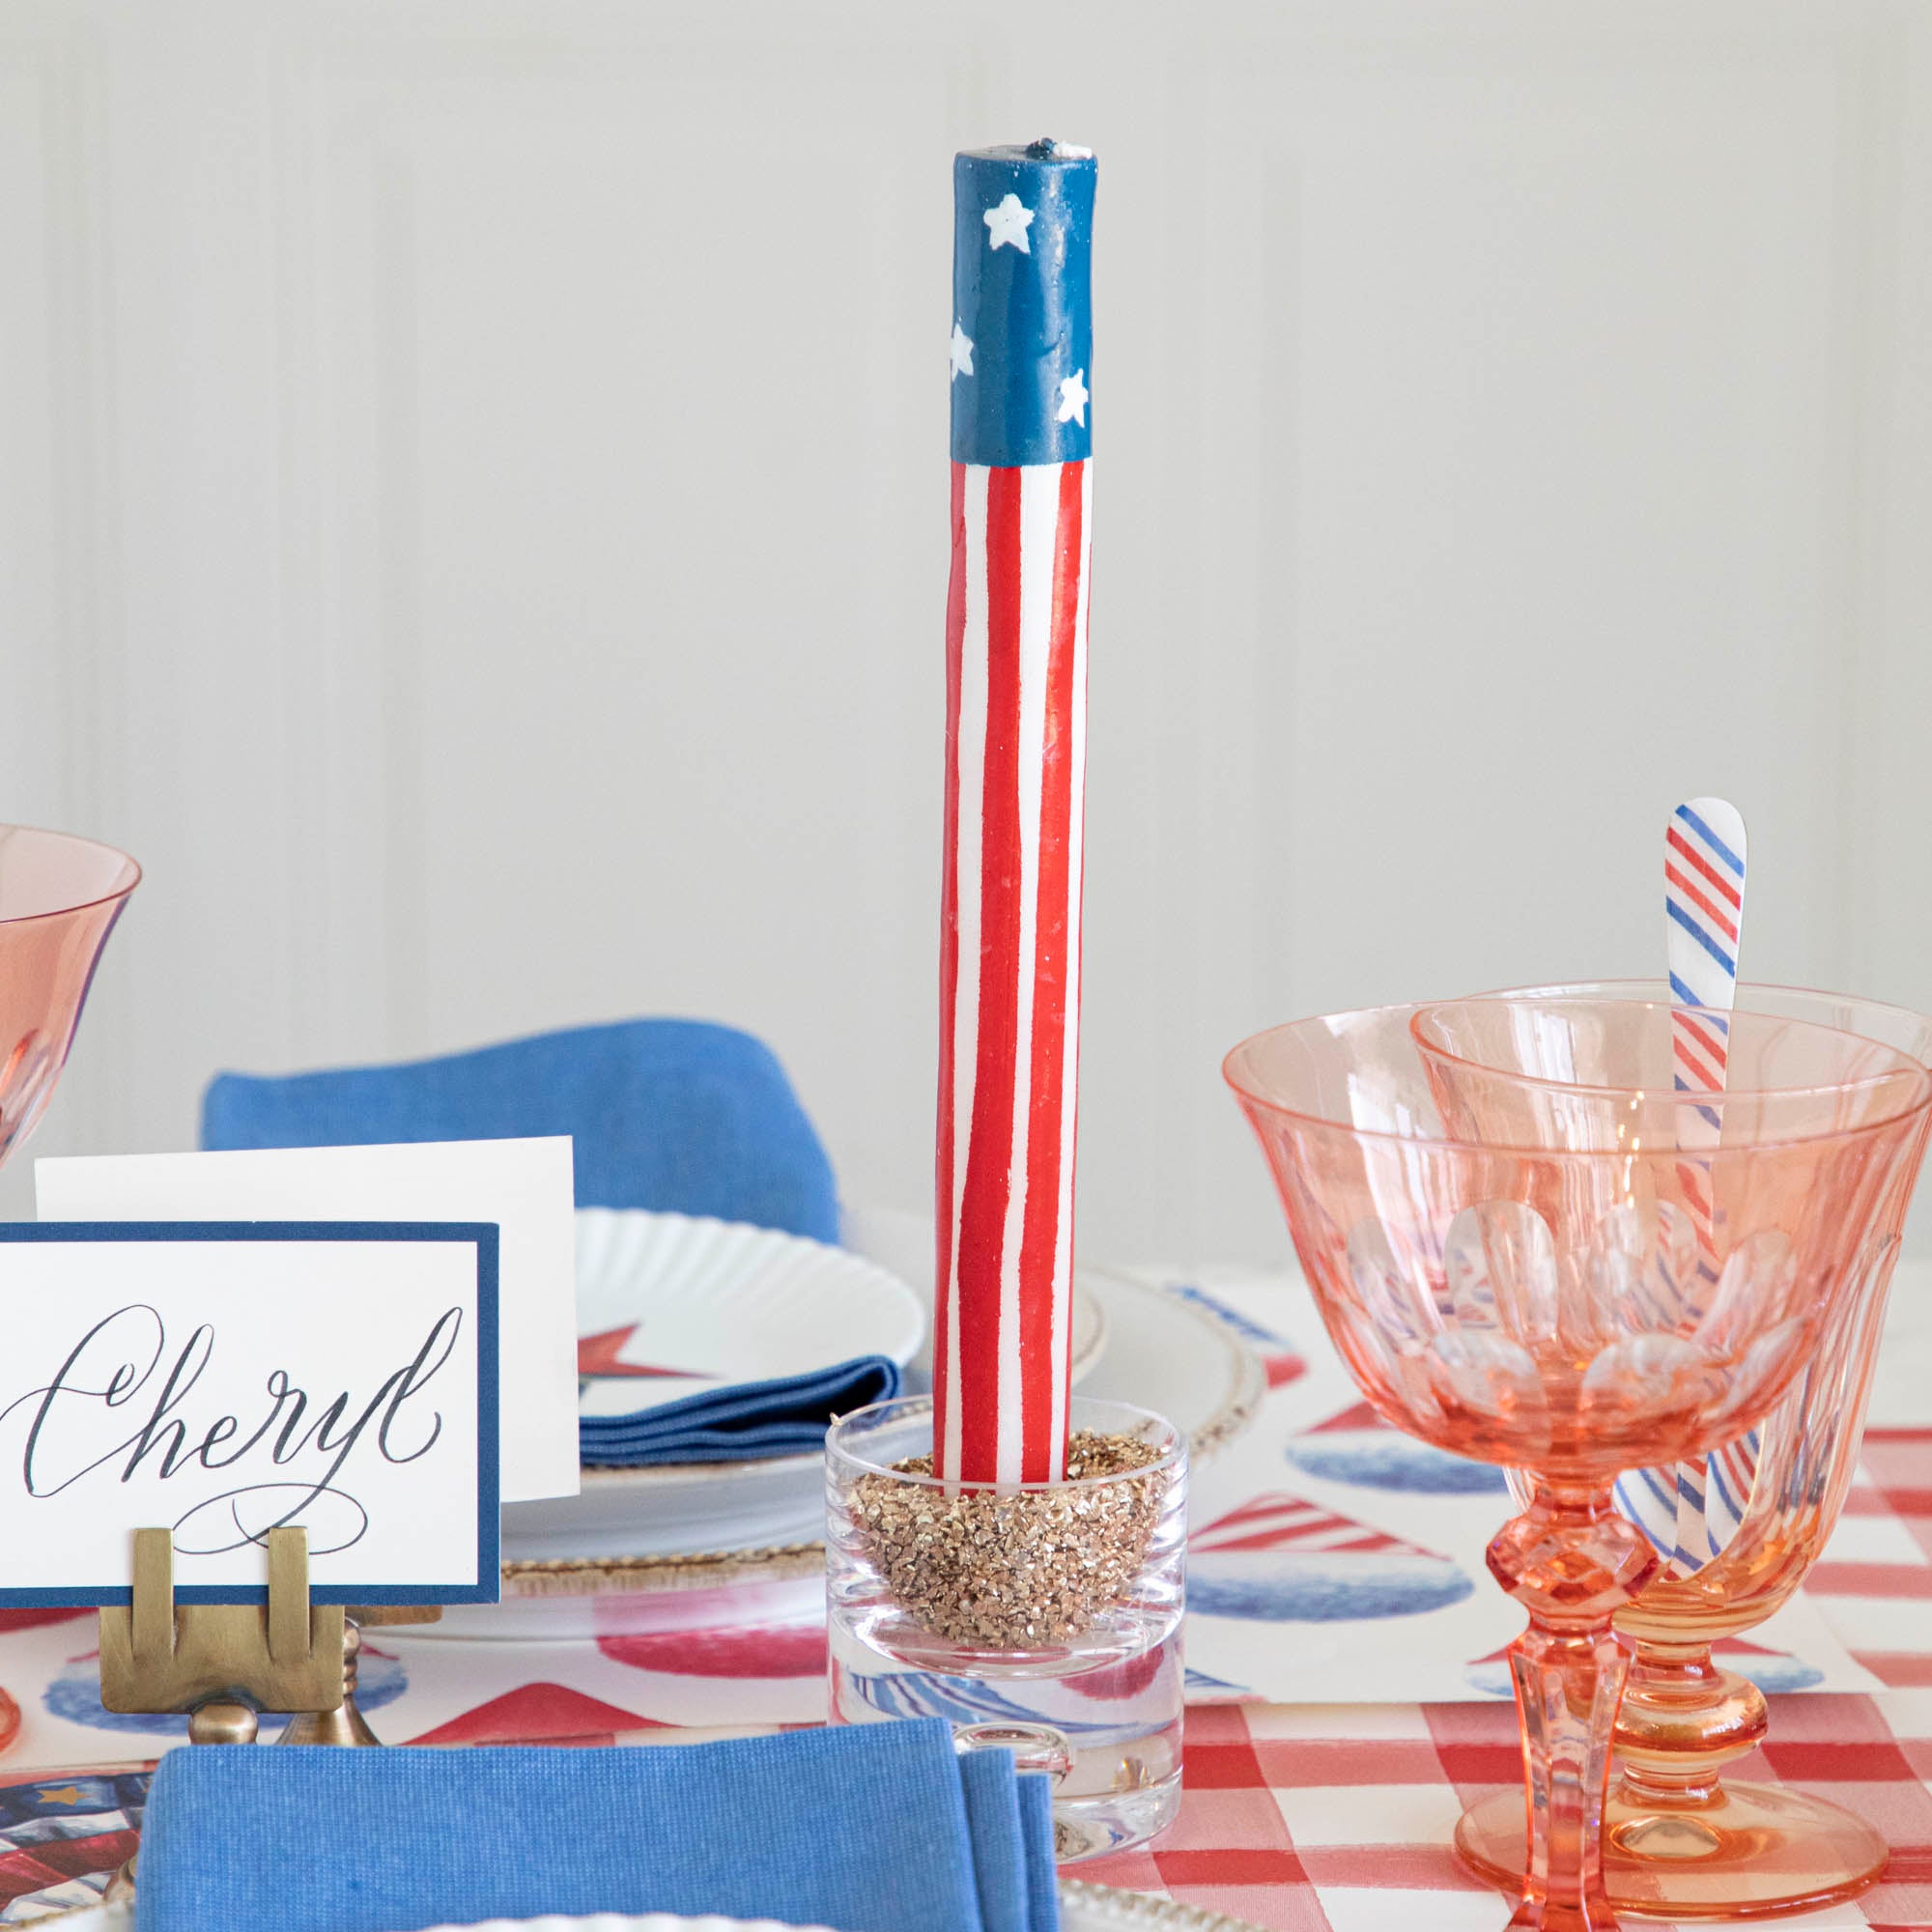 Two Star Spangled Taper Candles by Glitterville arranged in a cross shape, wrapped with a Stars &amp; Stripes-themed design.